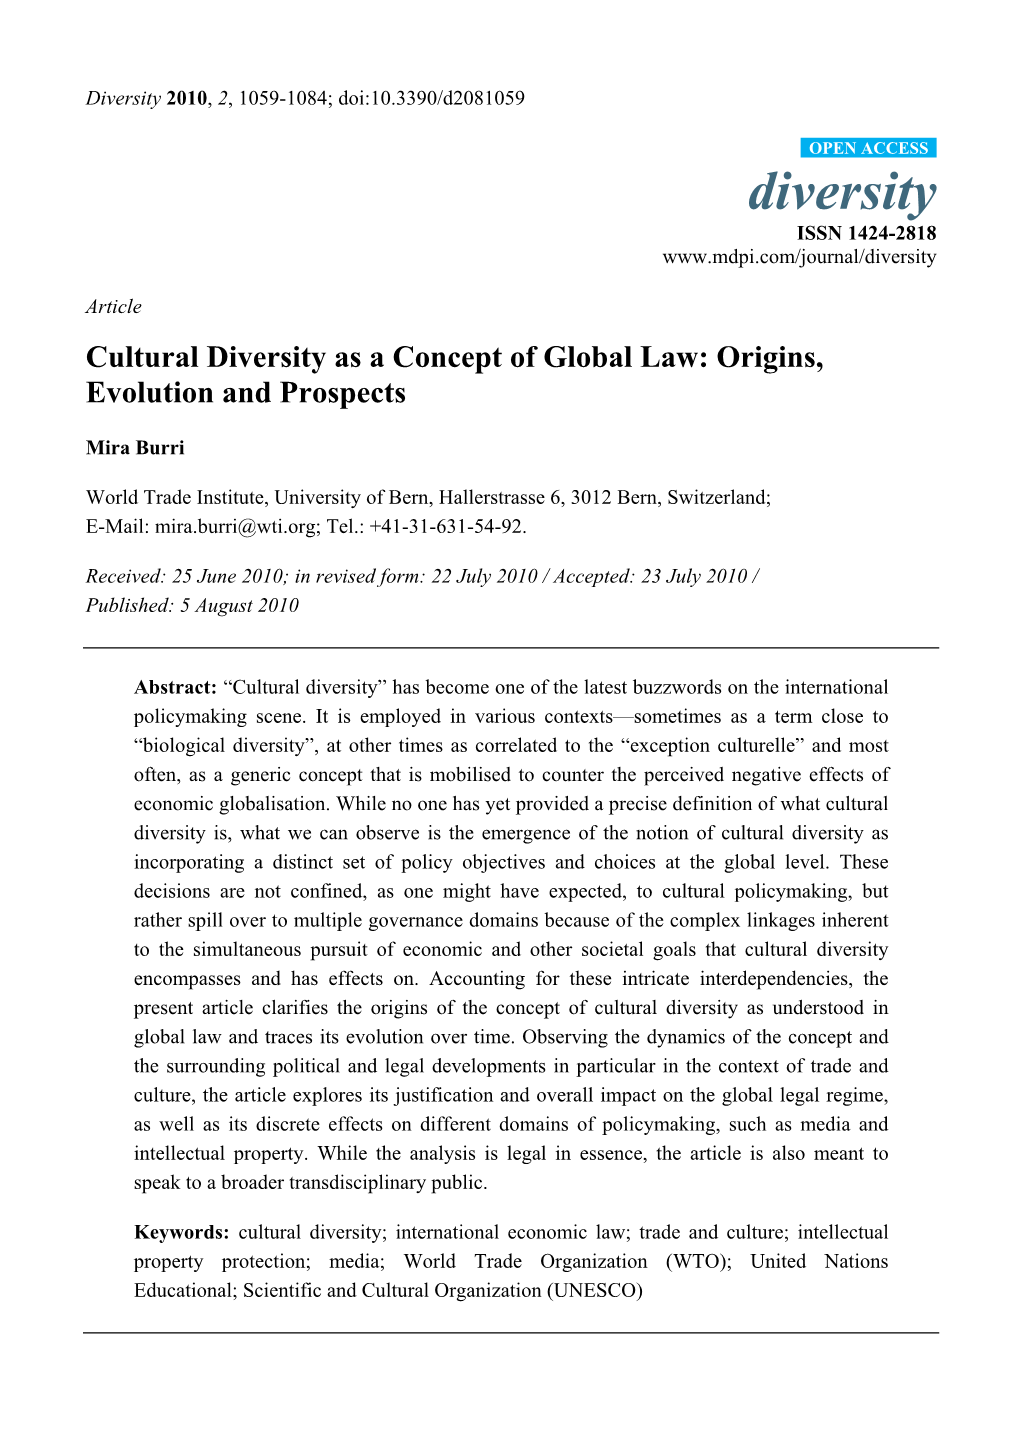 Cultural Diversity As a Concept of Global Law: Origins, Evolution and Prospects